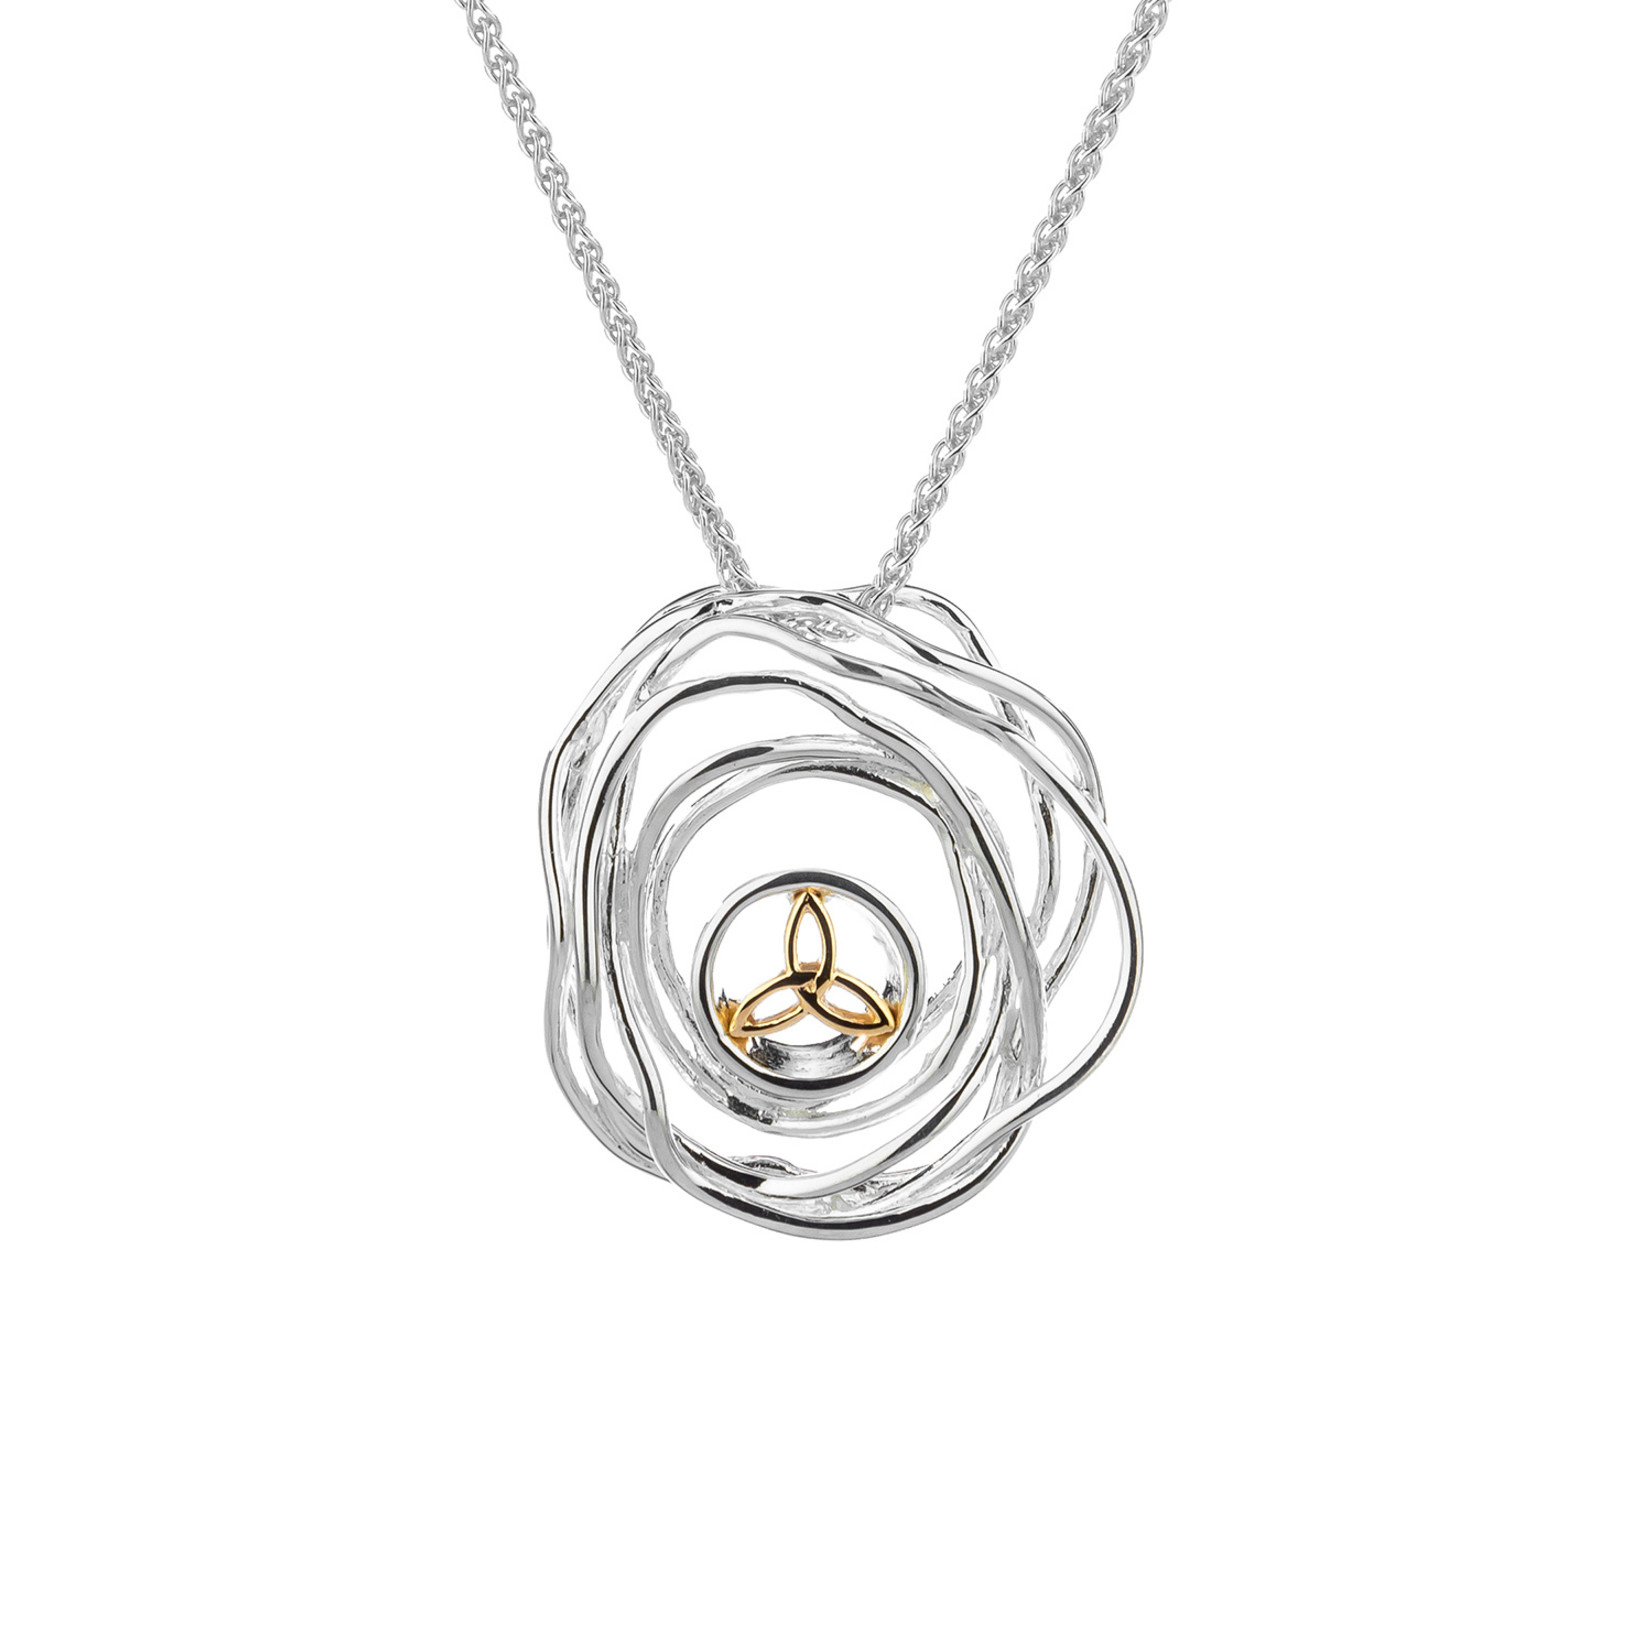 Keith Jack Silver + 10k Cradle of Life Pendant (Large)